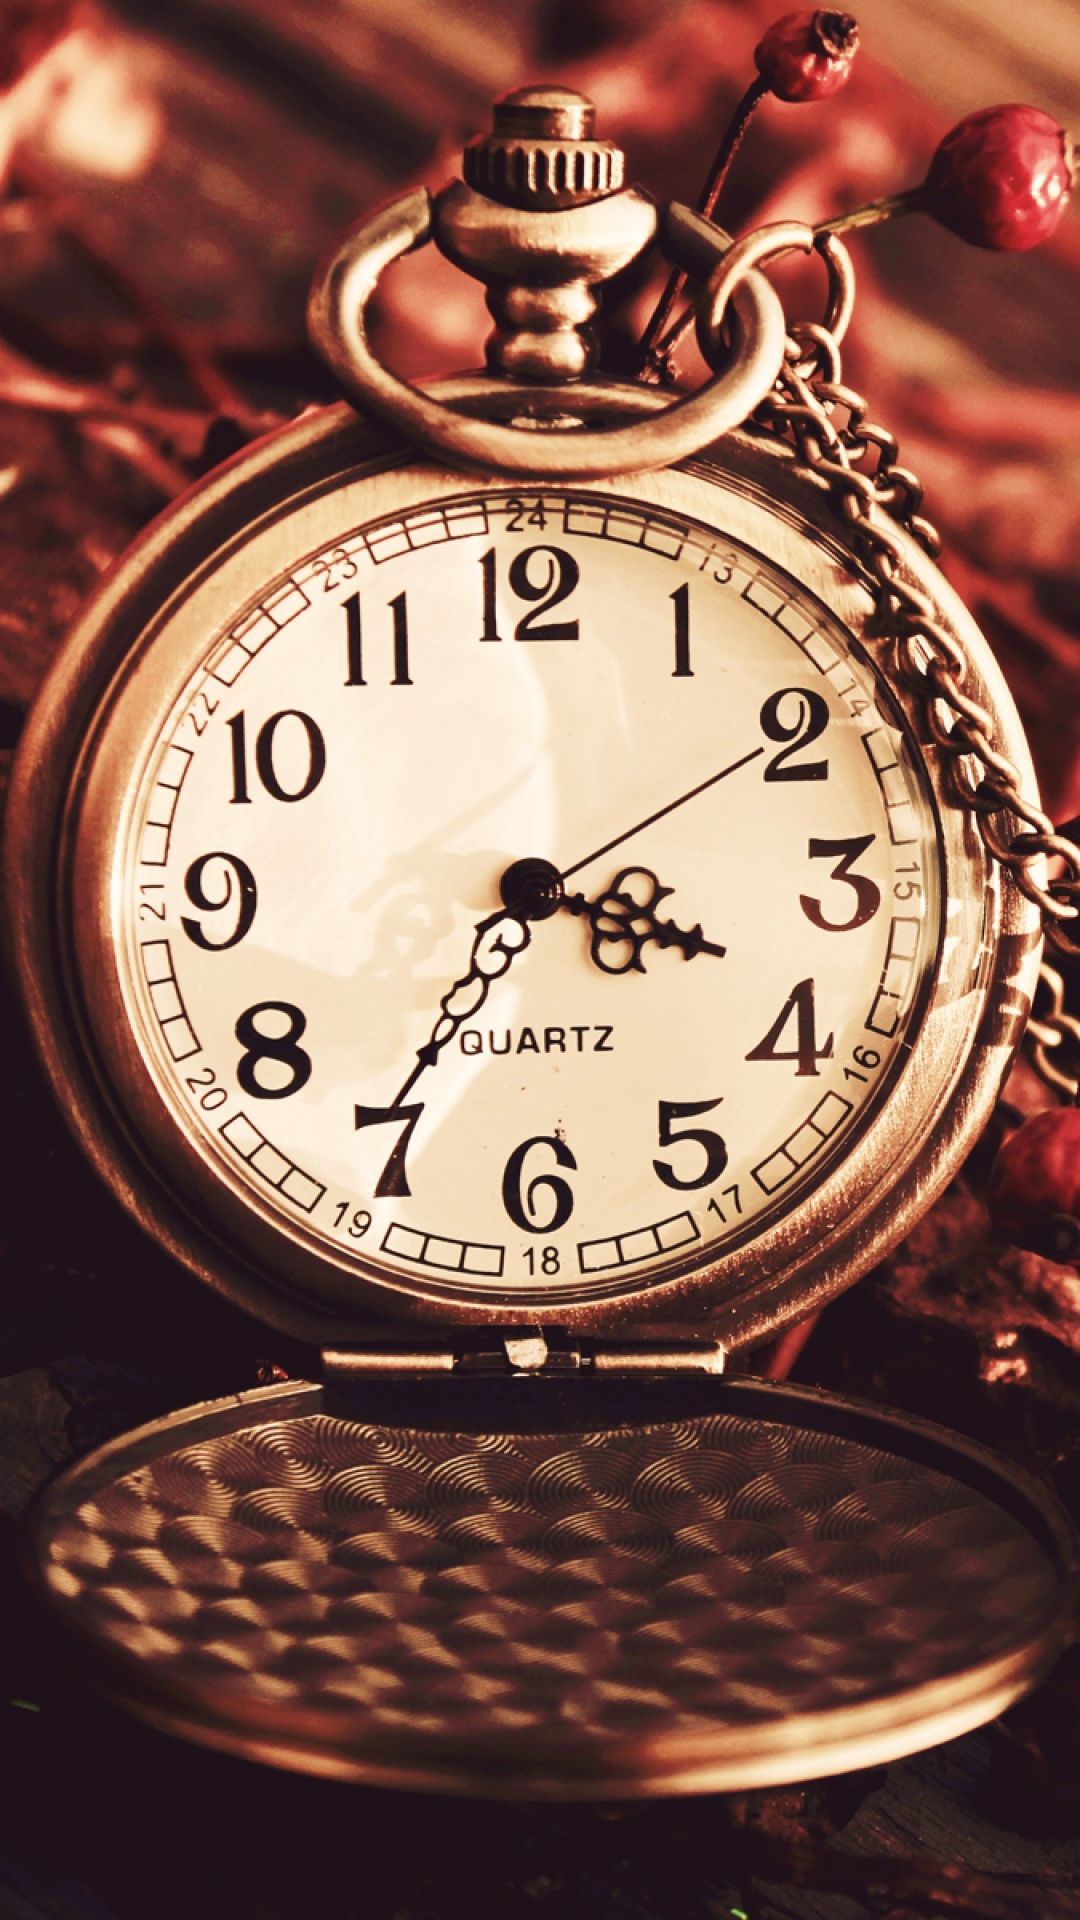 Vintage Watch Pocket Macro Autumn Berries Dry Chain Dial iPhone 8 Wallpaper Free Download